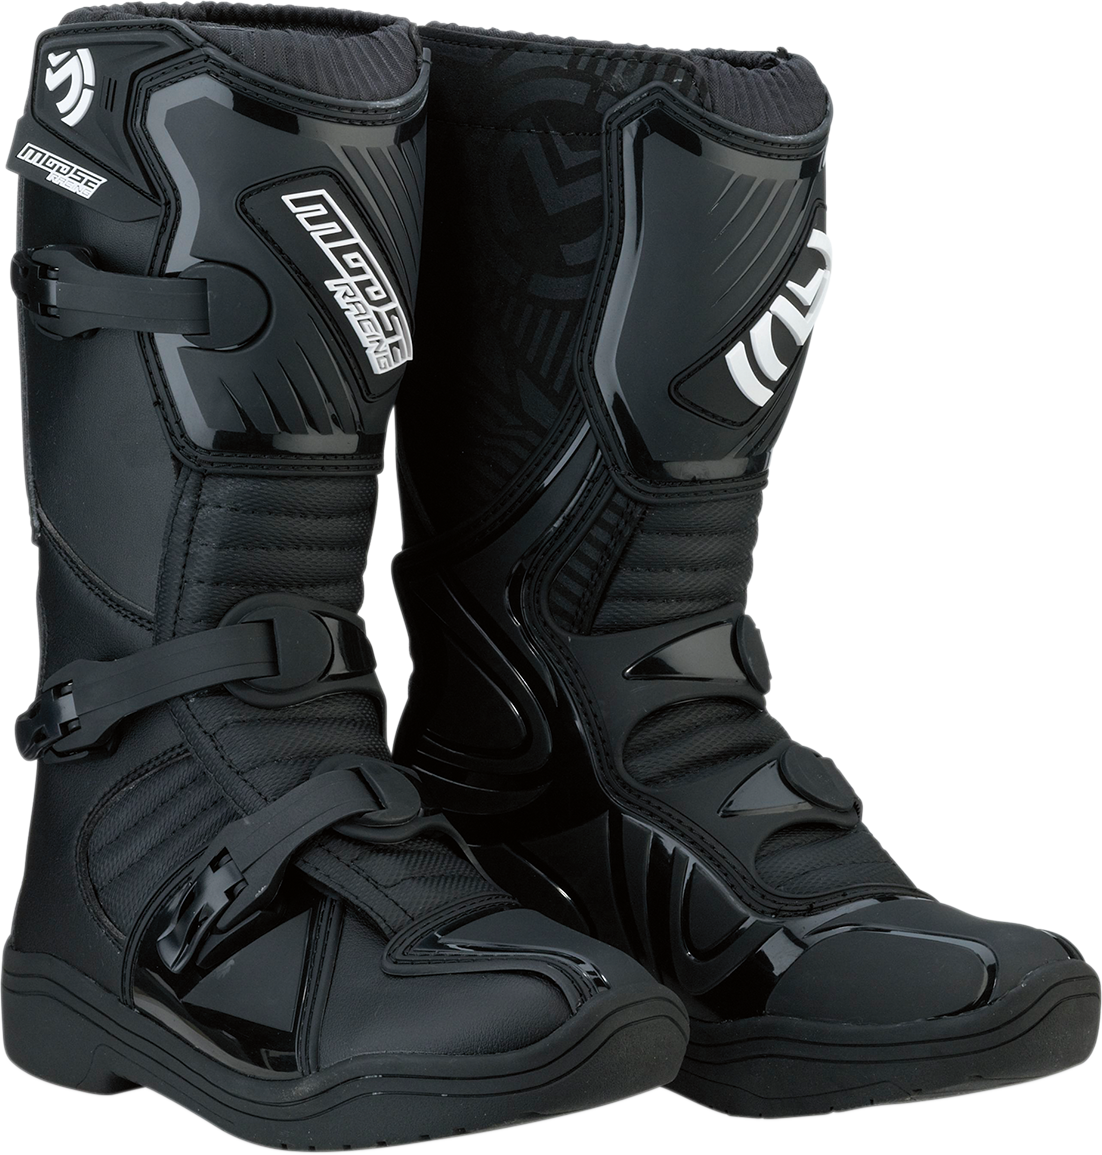 MOOSE RACING M1.3 Boots - Black - Size 6 3411-0428